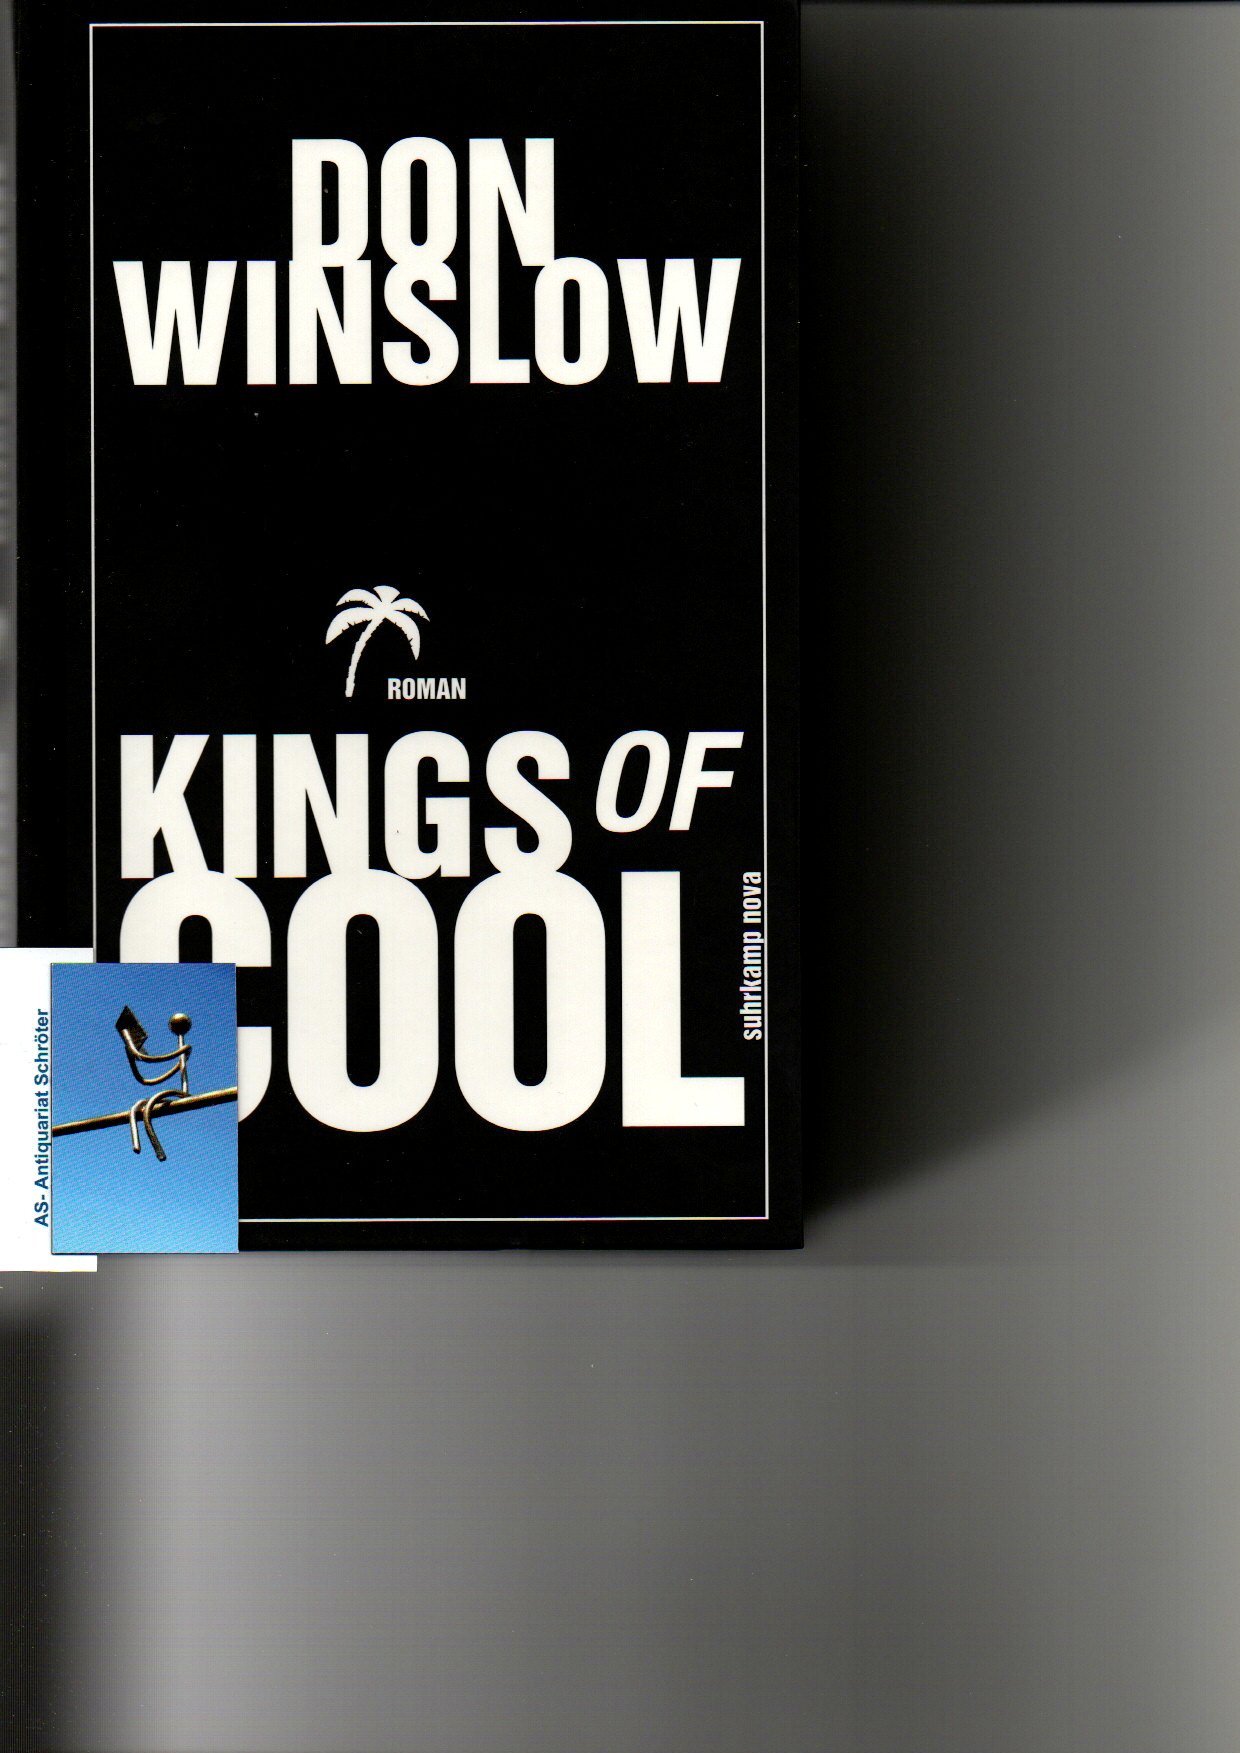 Kings of Cool. Roman. [signiert, signed). - Winslow, Don (1953)